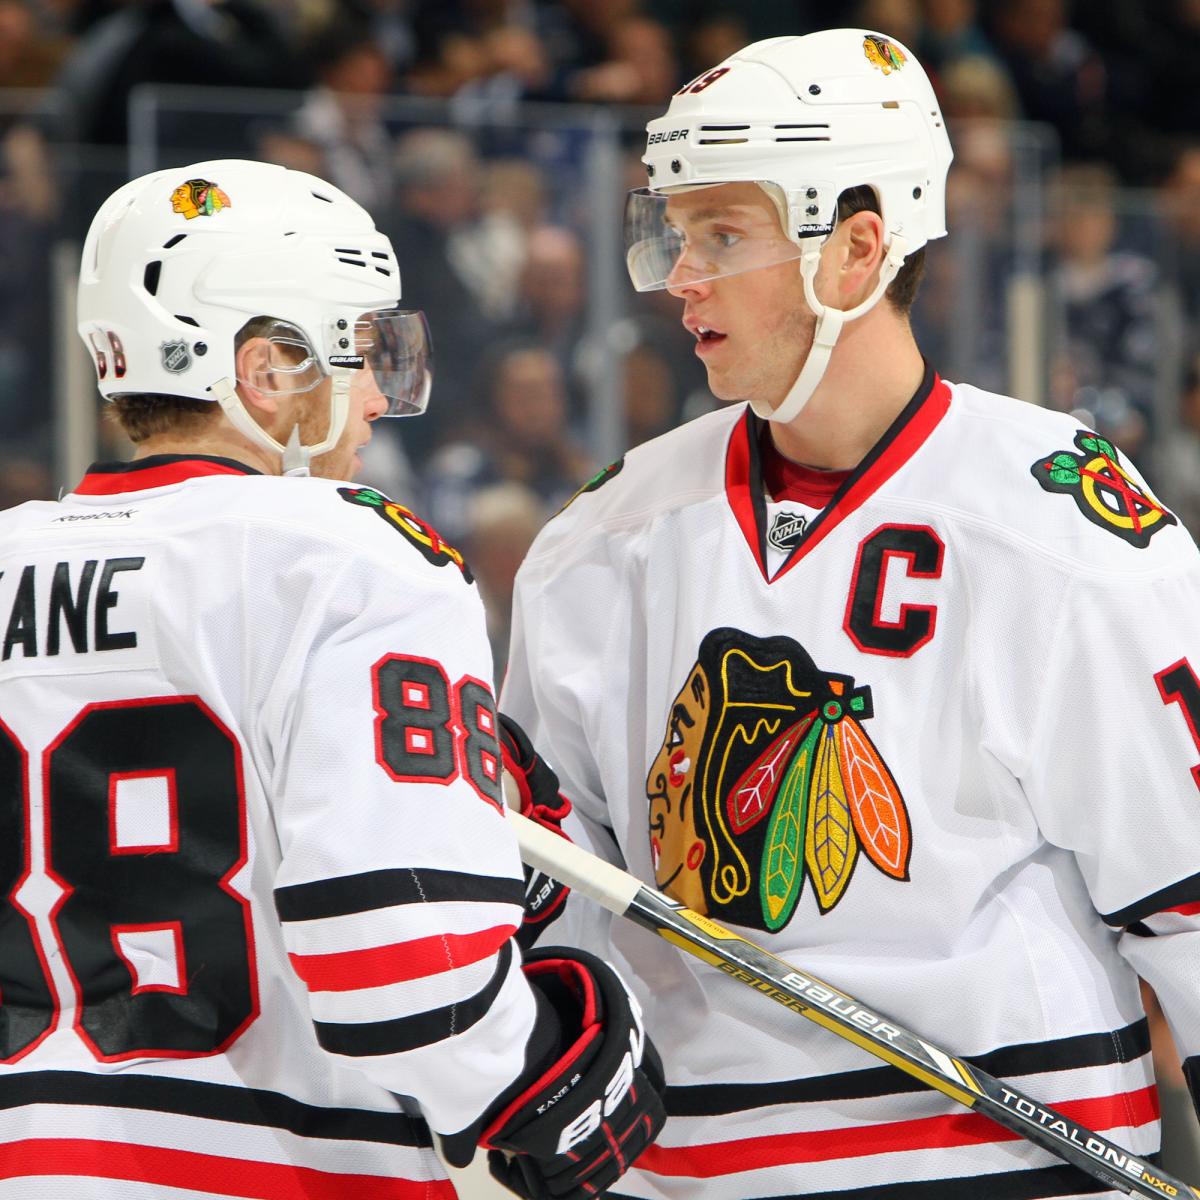 NICK FOLIGNO, JONATHAN TOEWS NAMED CAPTAINS FOR 2015 NHL ALL-STAR WEEKEND